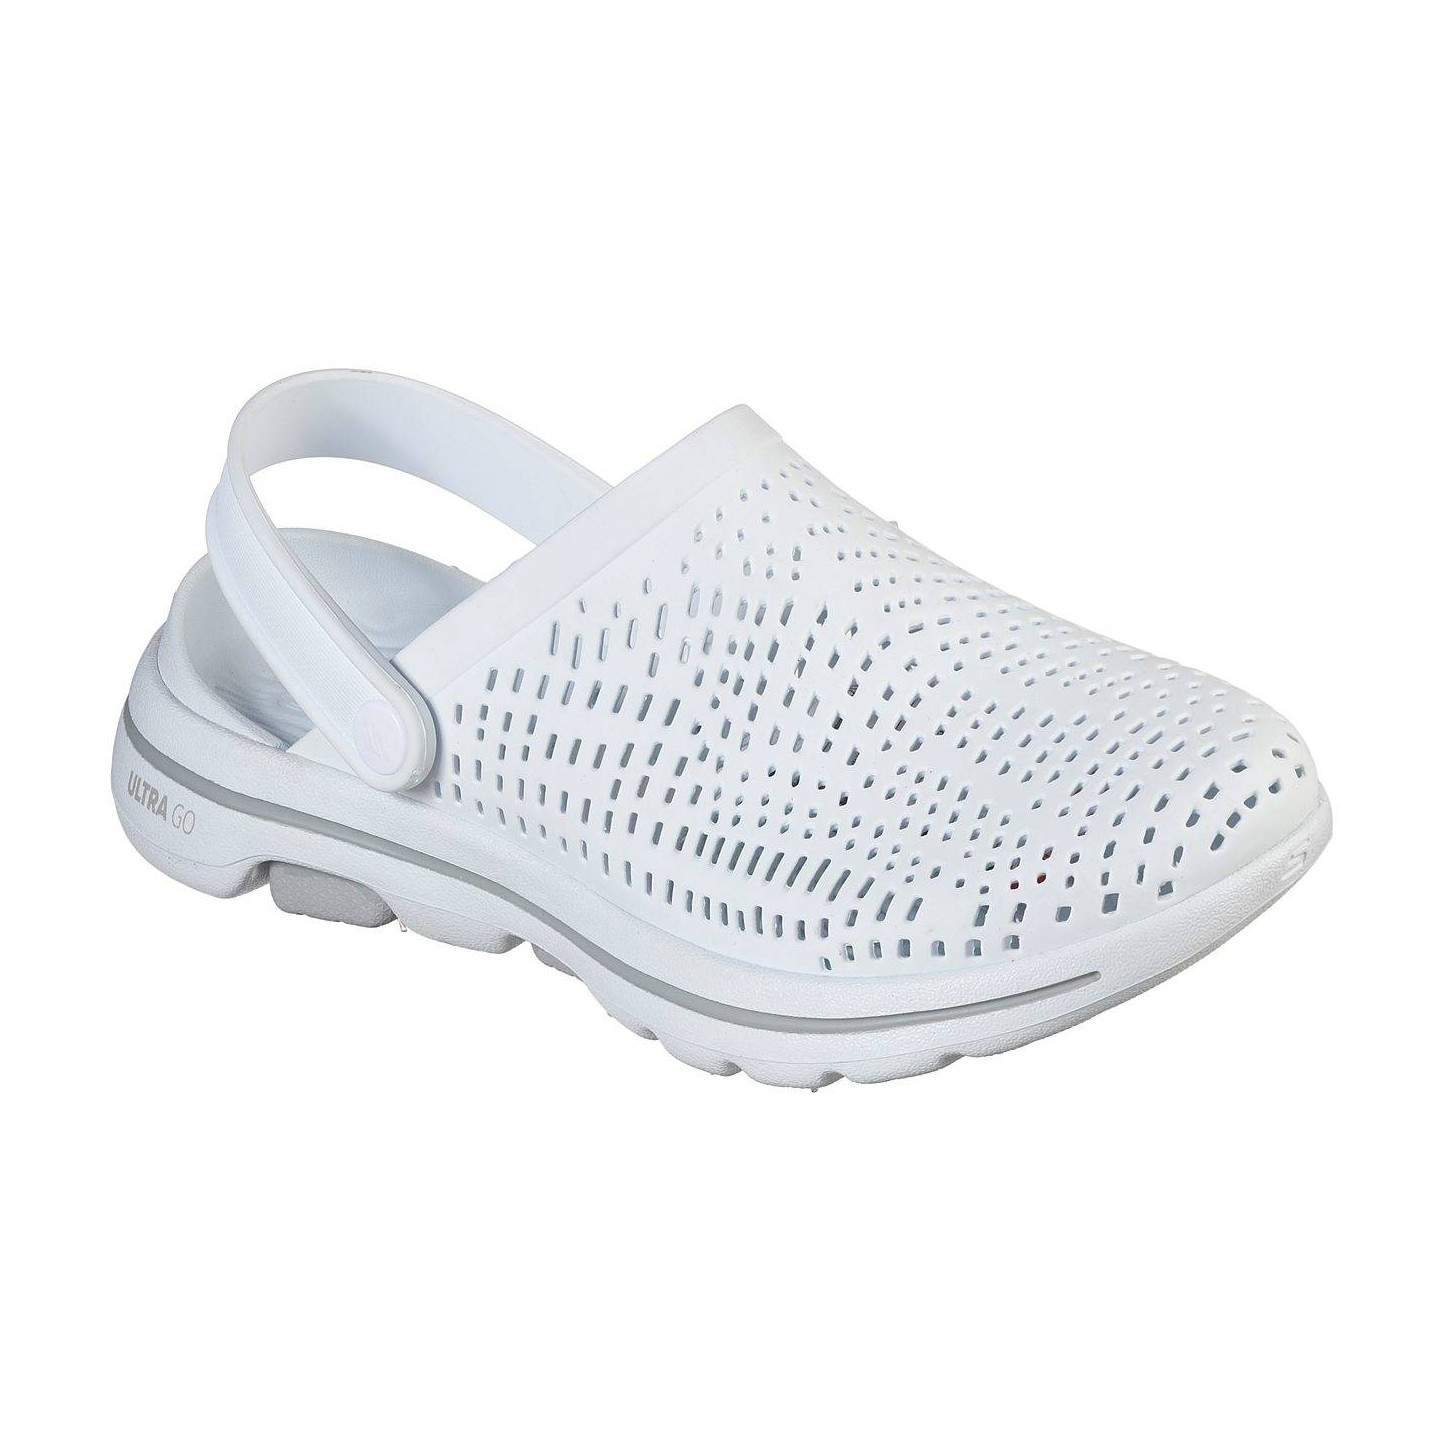 skechers shoes slippers